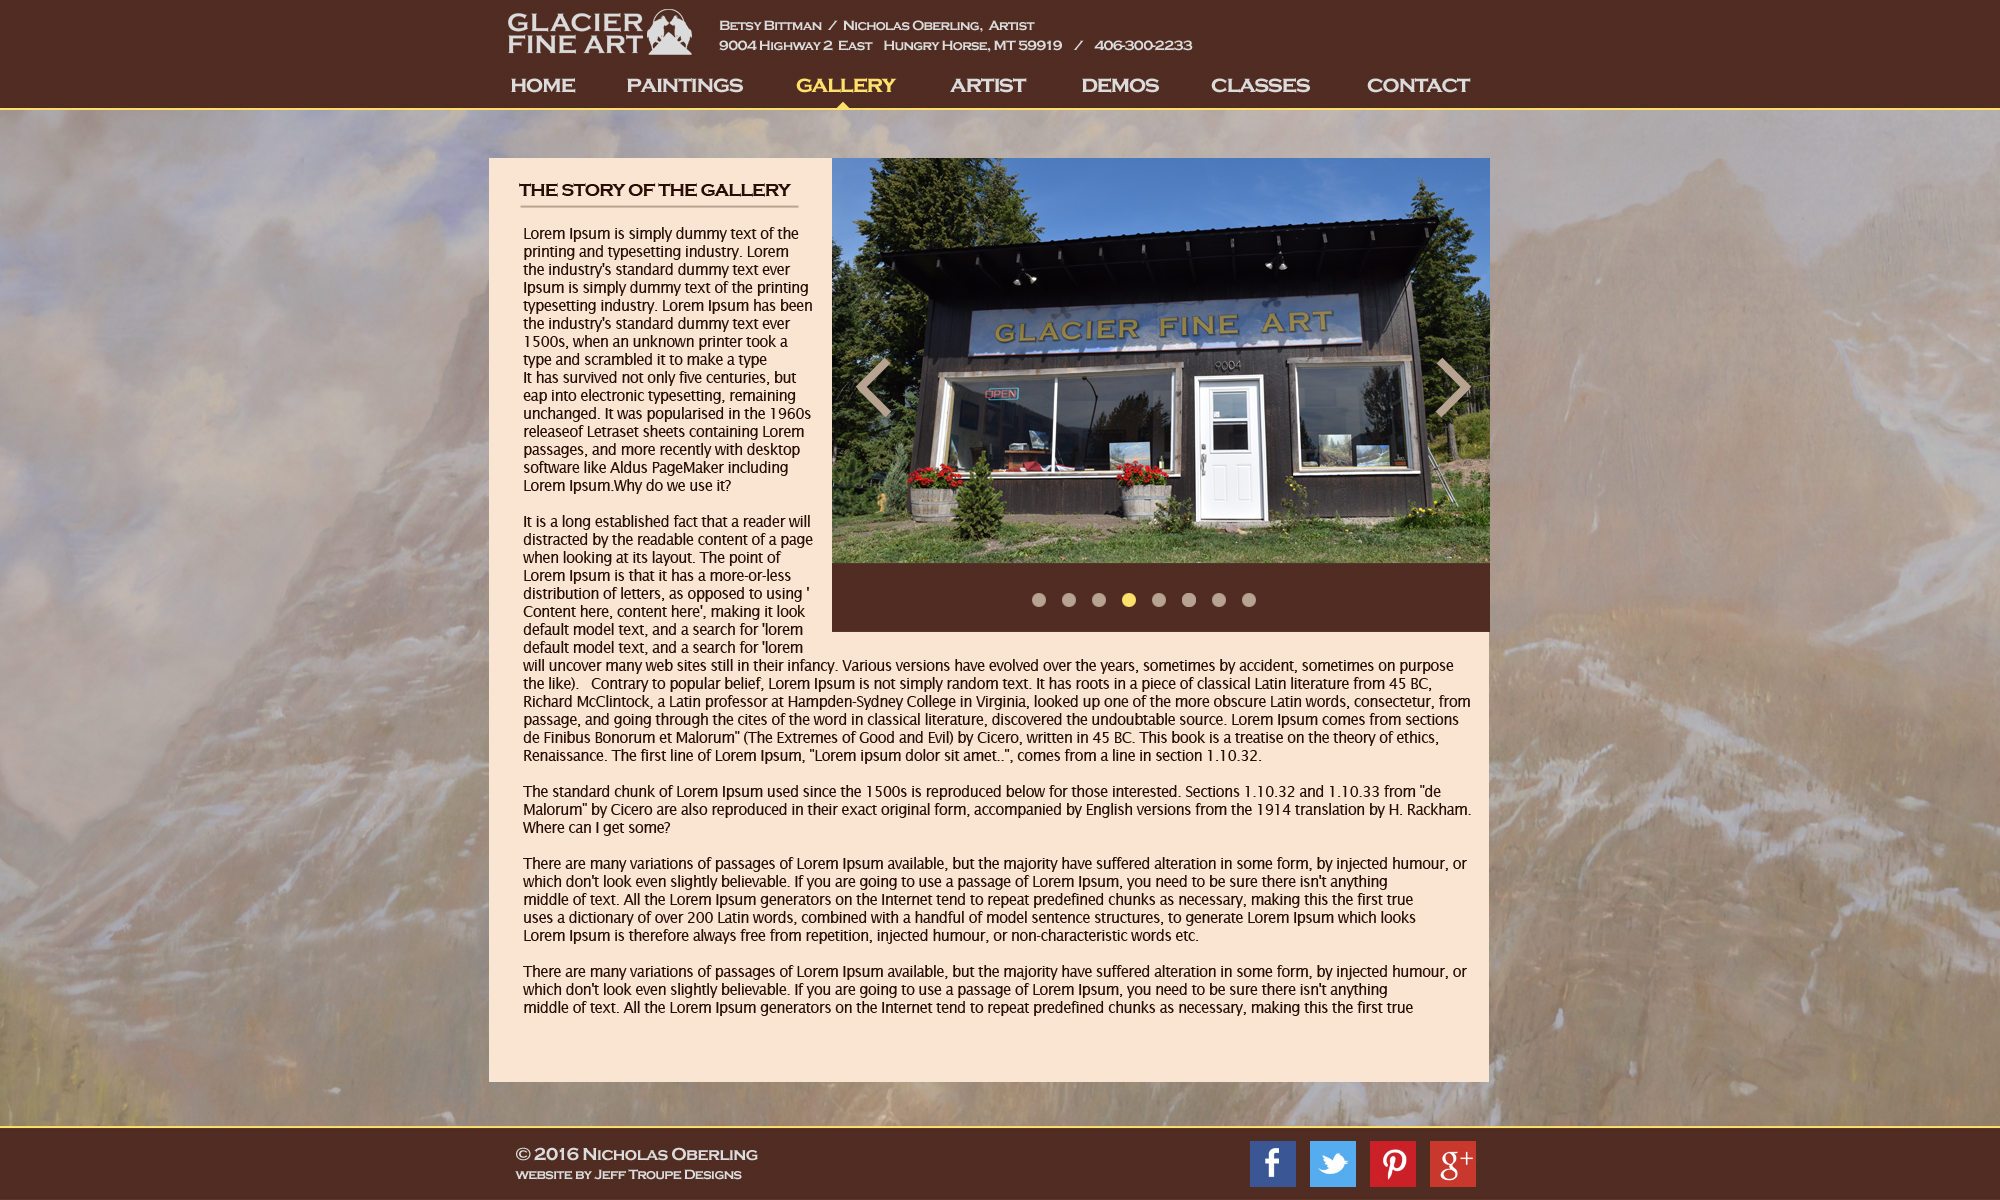 website design image photo of building with text 